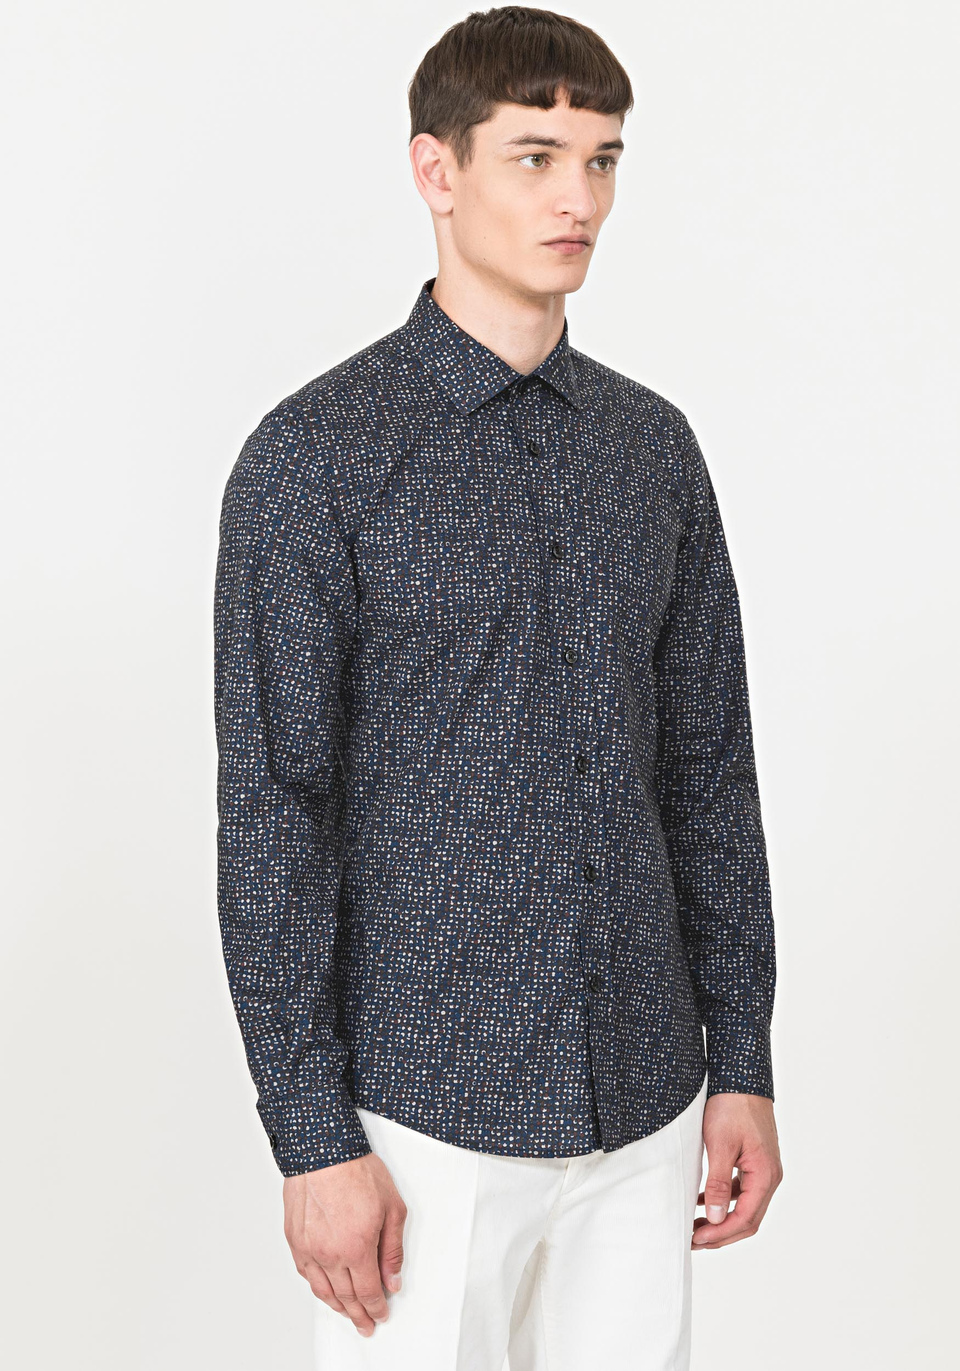 SLIM-FIT SHIRT IN 100% COTTON WITH A PRINT PATTERN - Antony Morato Online Shop